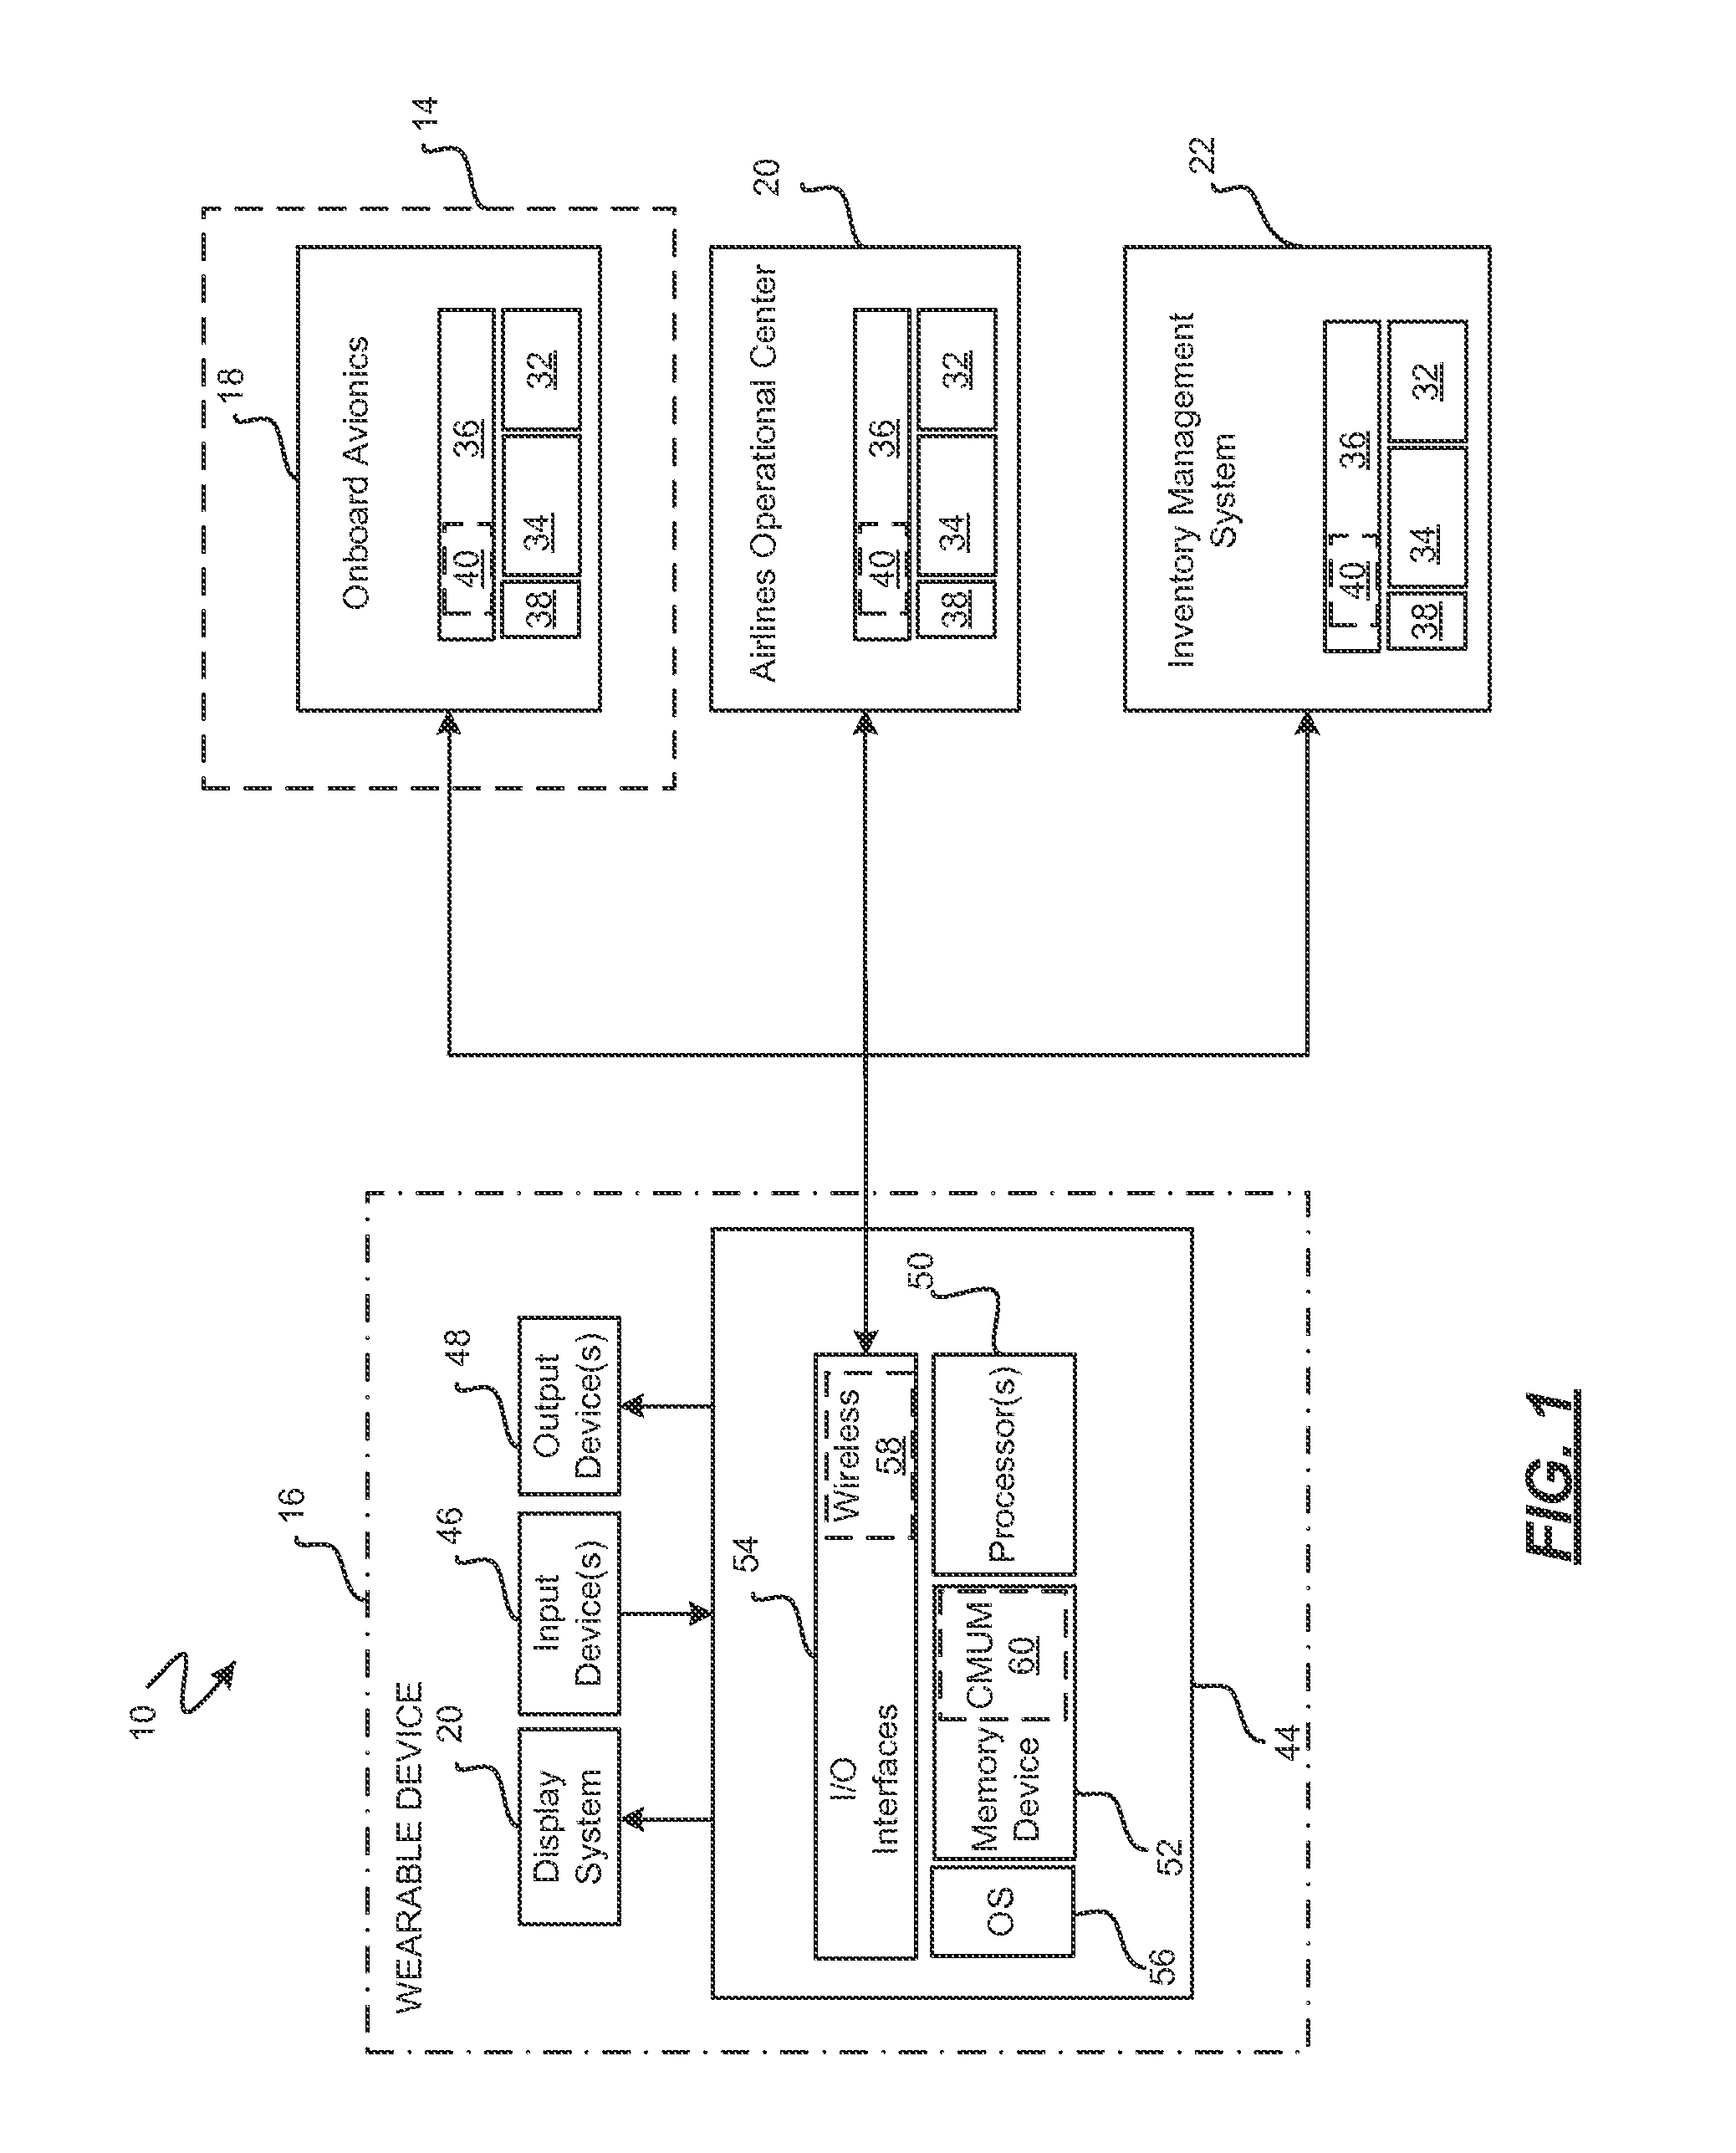 Aircraft maintenance systems and methods using wearable device